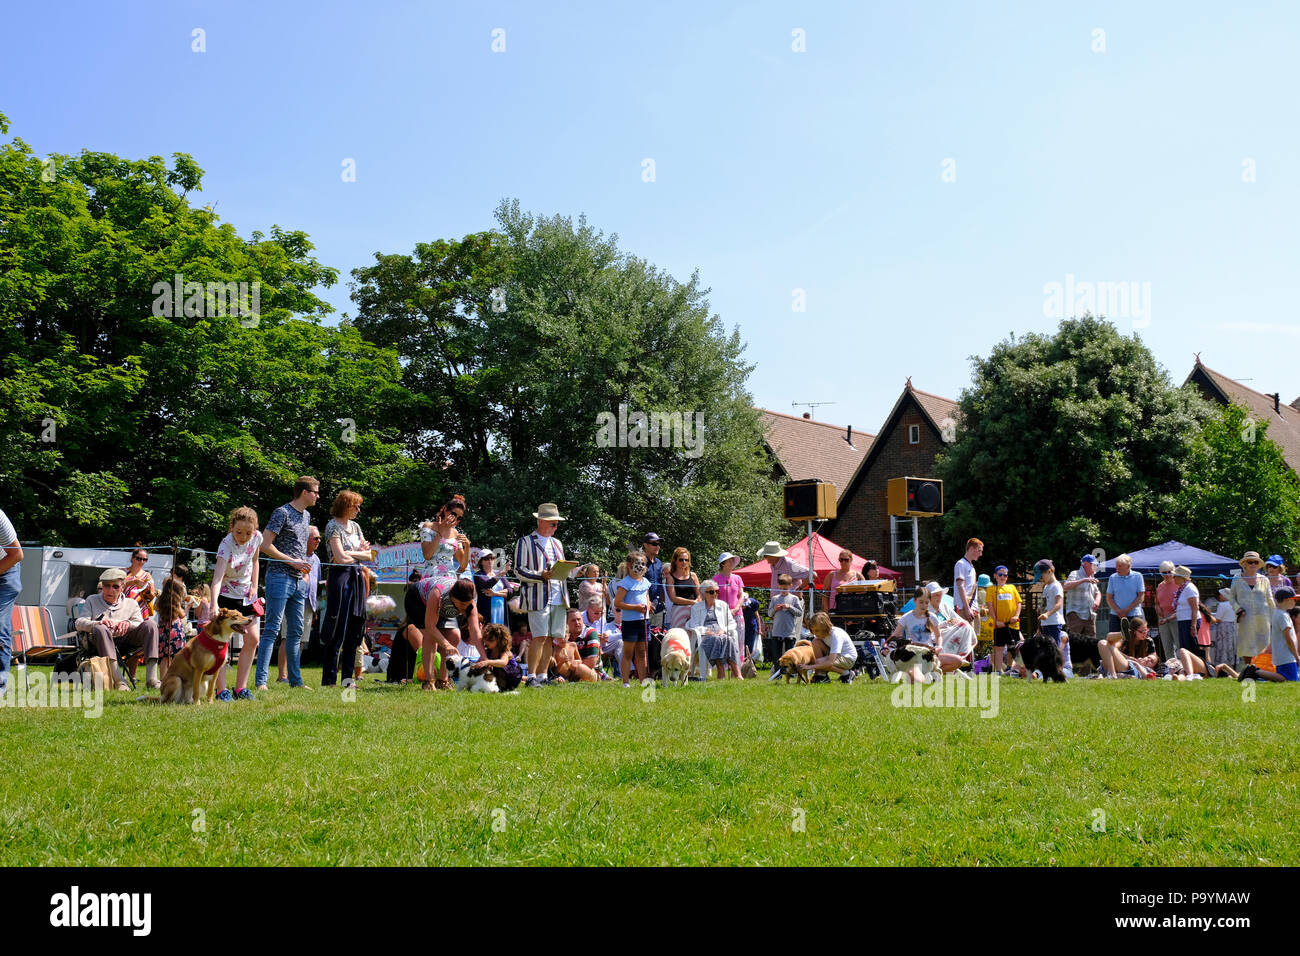 East Preston, West Sussex, UK. Fun dog show held on village green - competitors waiting in line to show their dogs Stock Photo